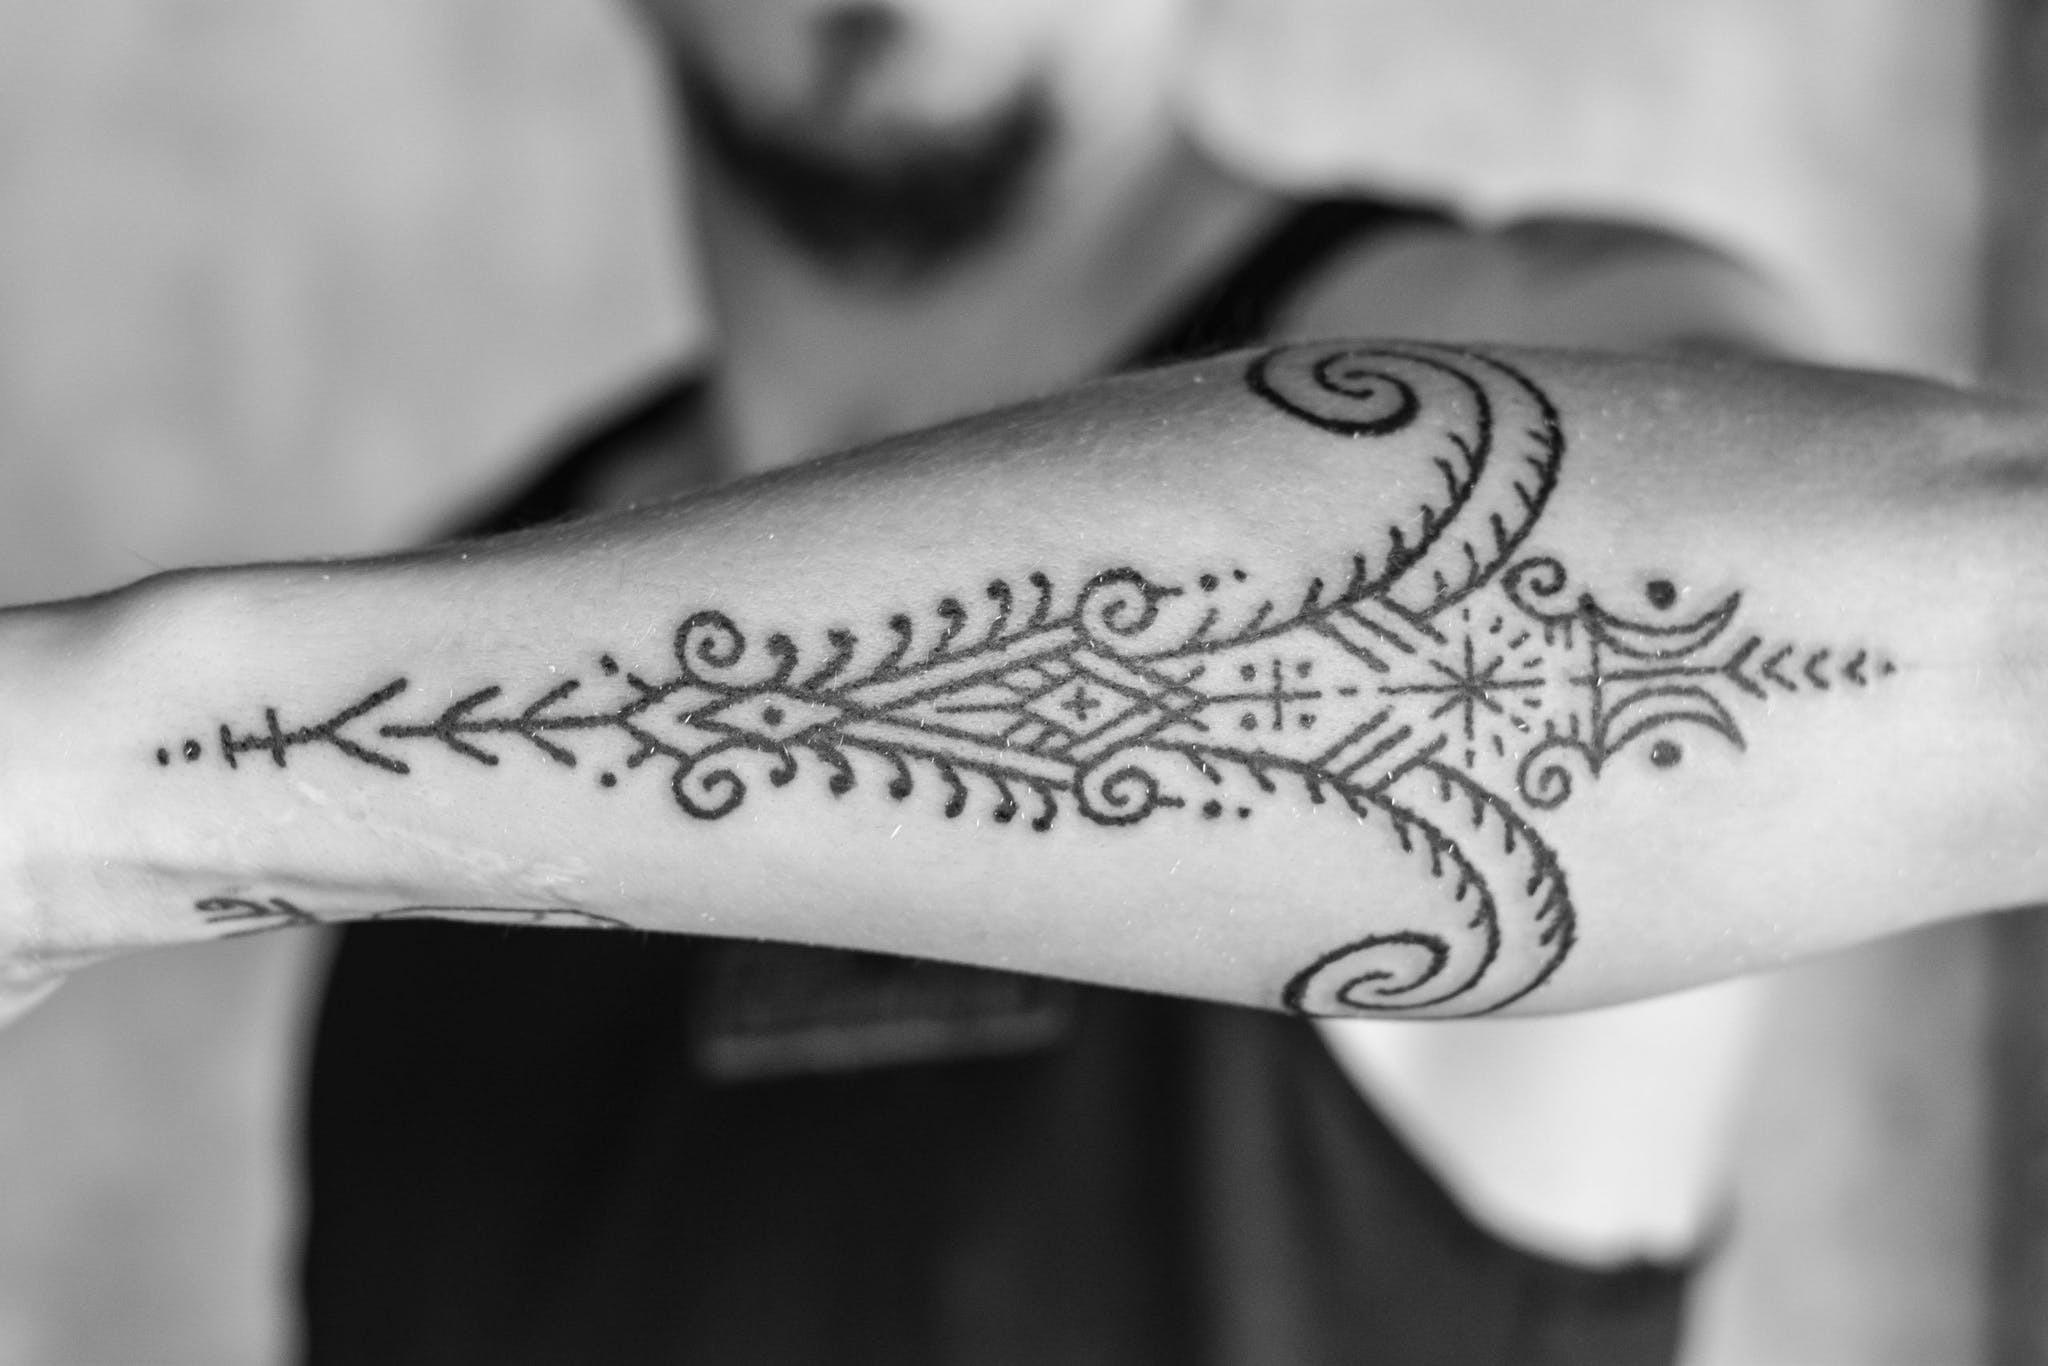 ACE Tattooz & Art Studio INDIA - Banjara \ Rabari Tattoo this is what the  client relates herself as , she loves the amazing ancient Indian tattoo  which is made by the